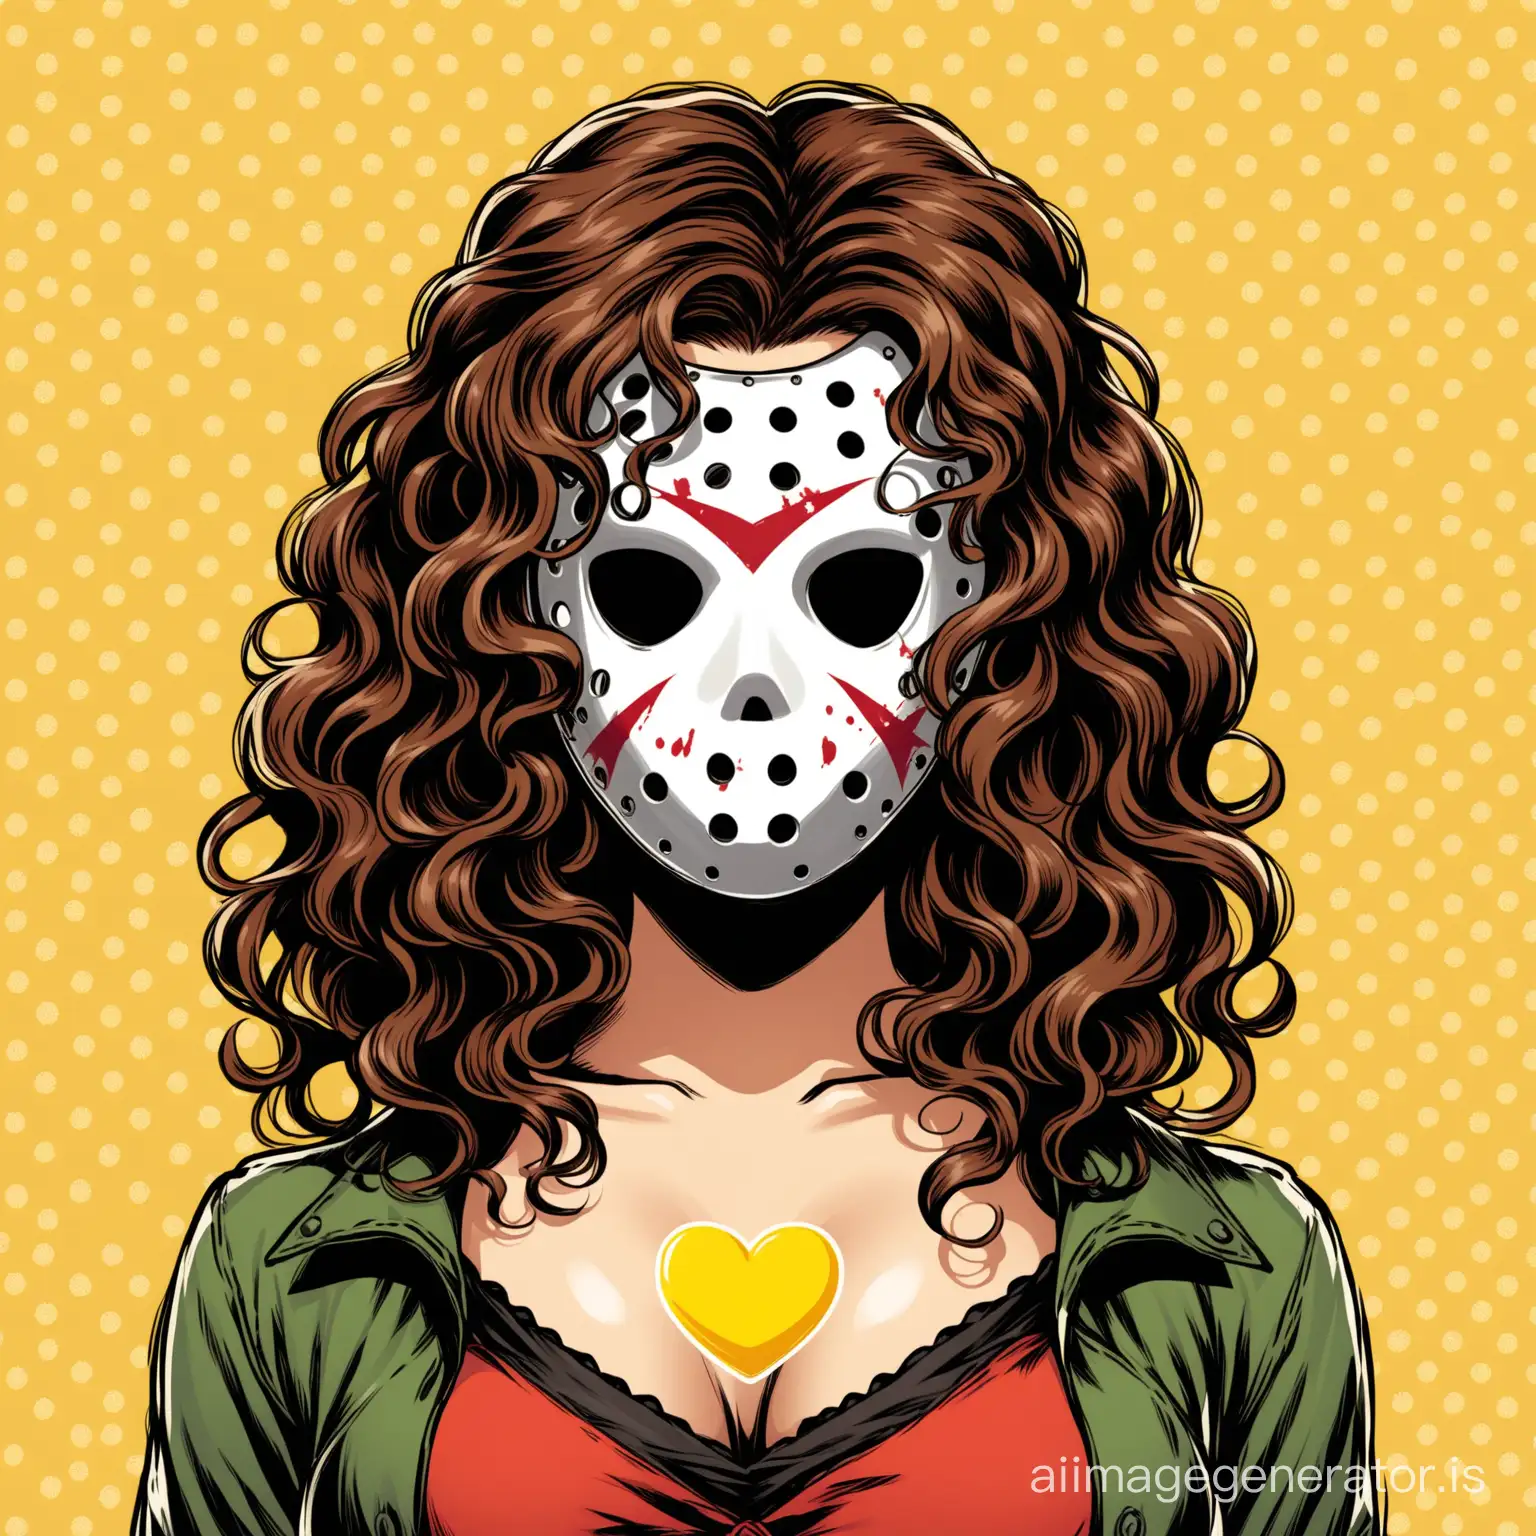 Brown curly hair lady with Jason Voorhees mask yellow heart background